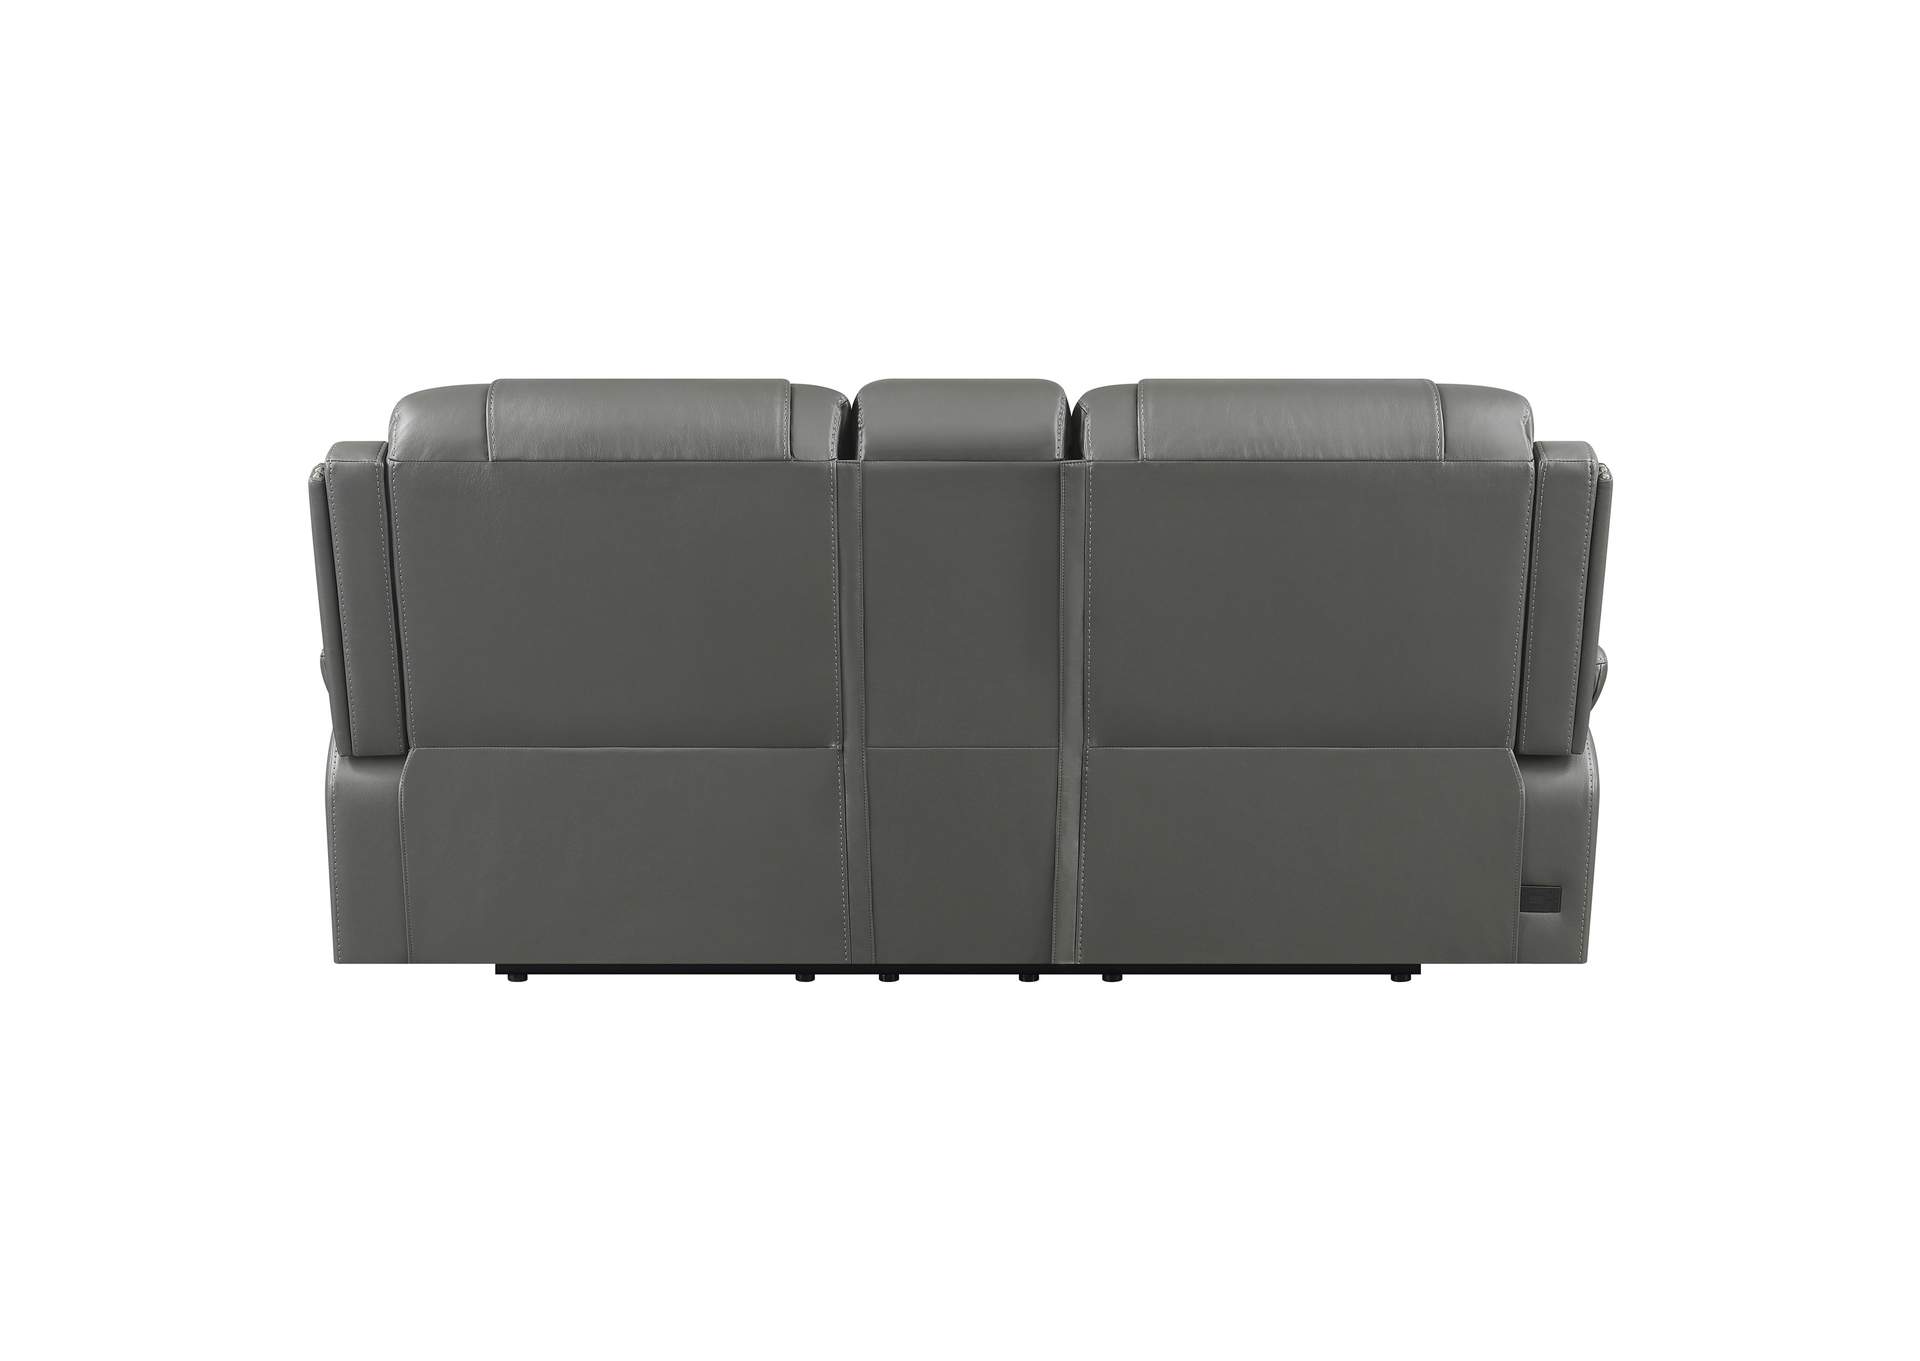 Flamenco 3-piece Tufted Upholstered Power Living Room Set Charcoal,Coaster Furniture